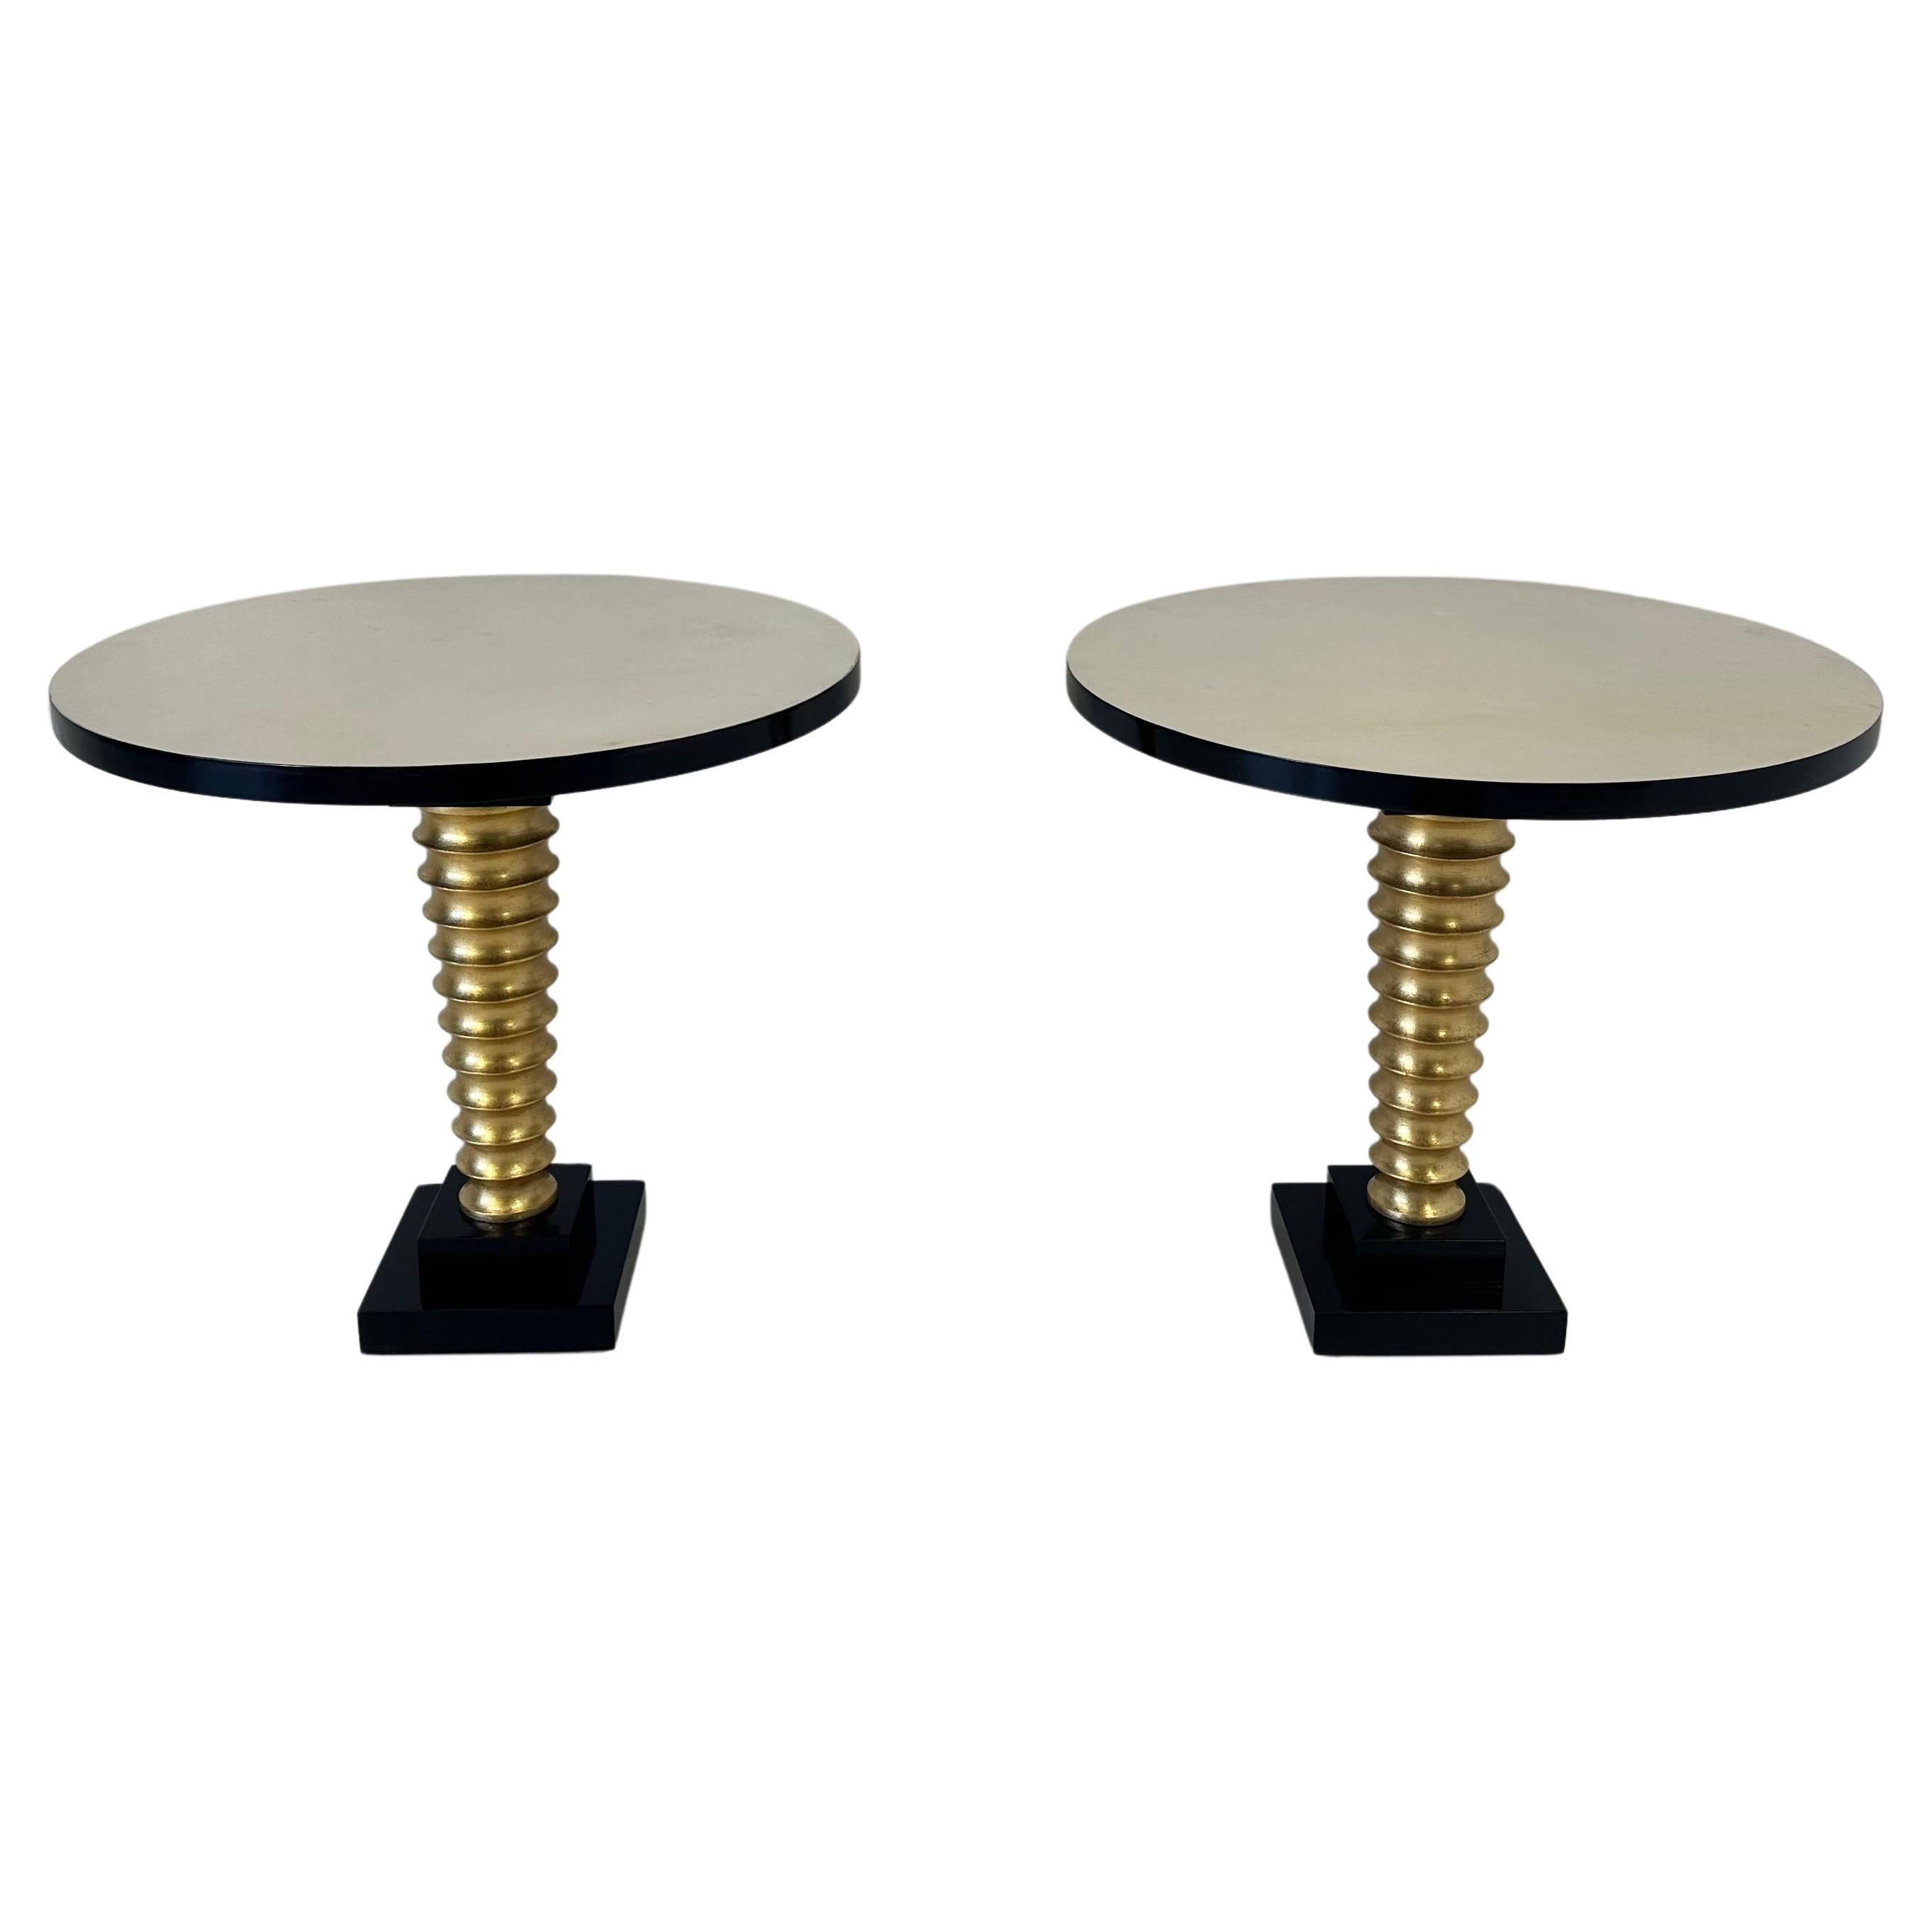 Italian Art Deco Style Parchment, Gold Leaf and Black Lacquer Coffee Tables  For Sale